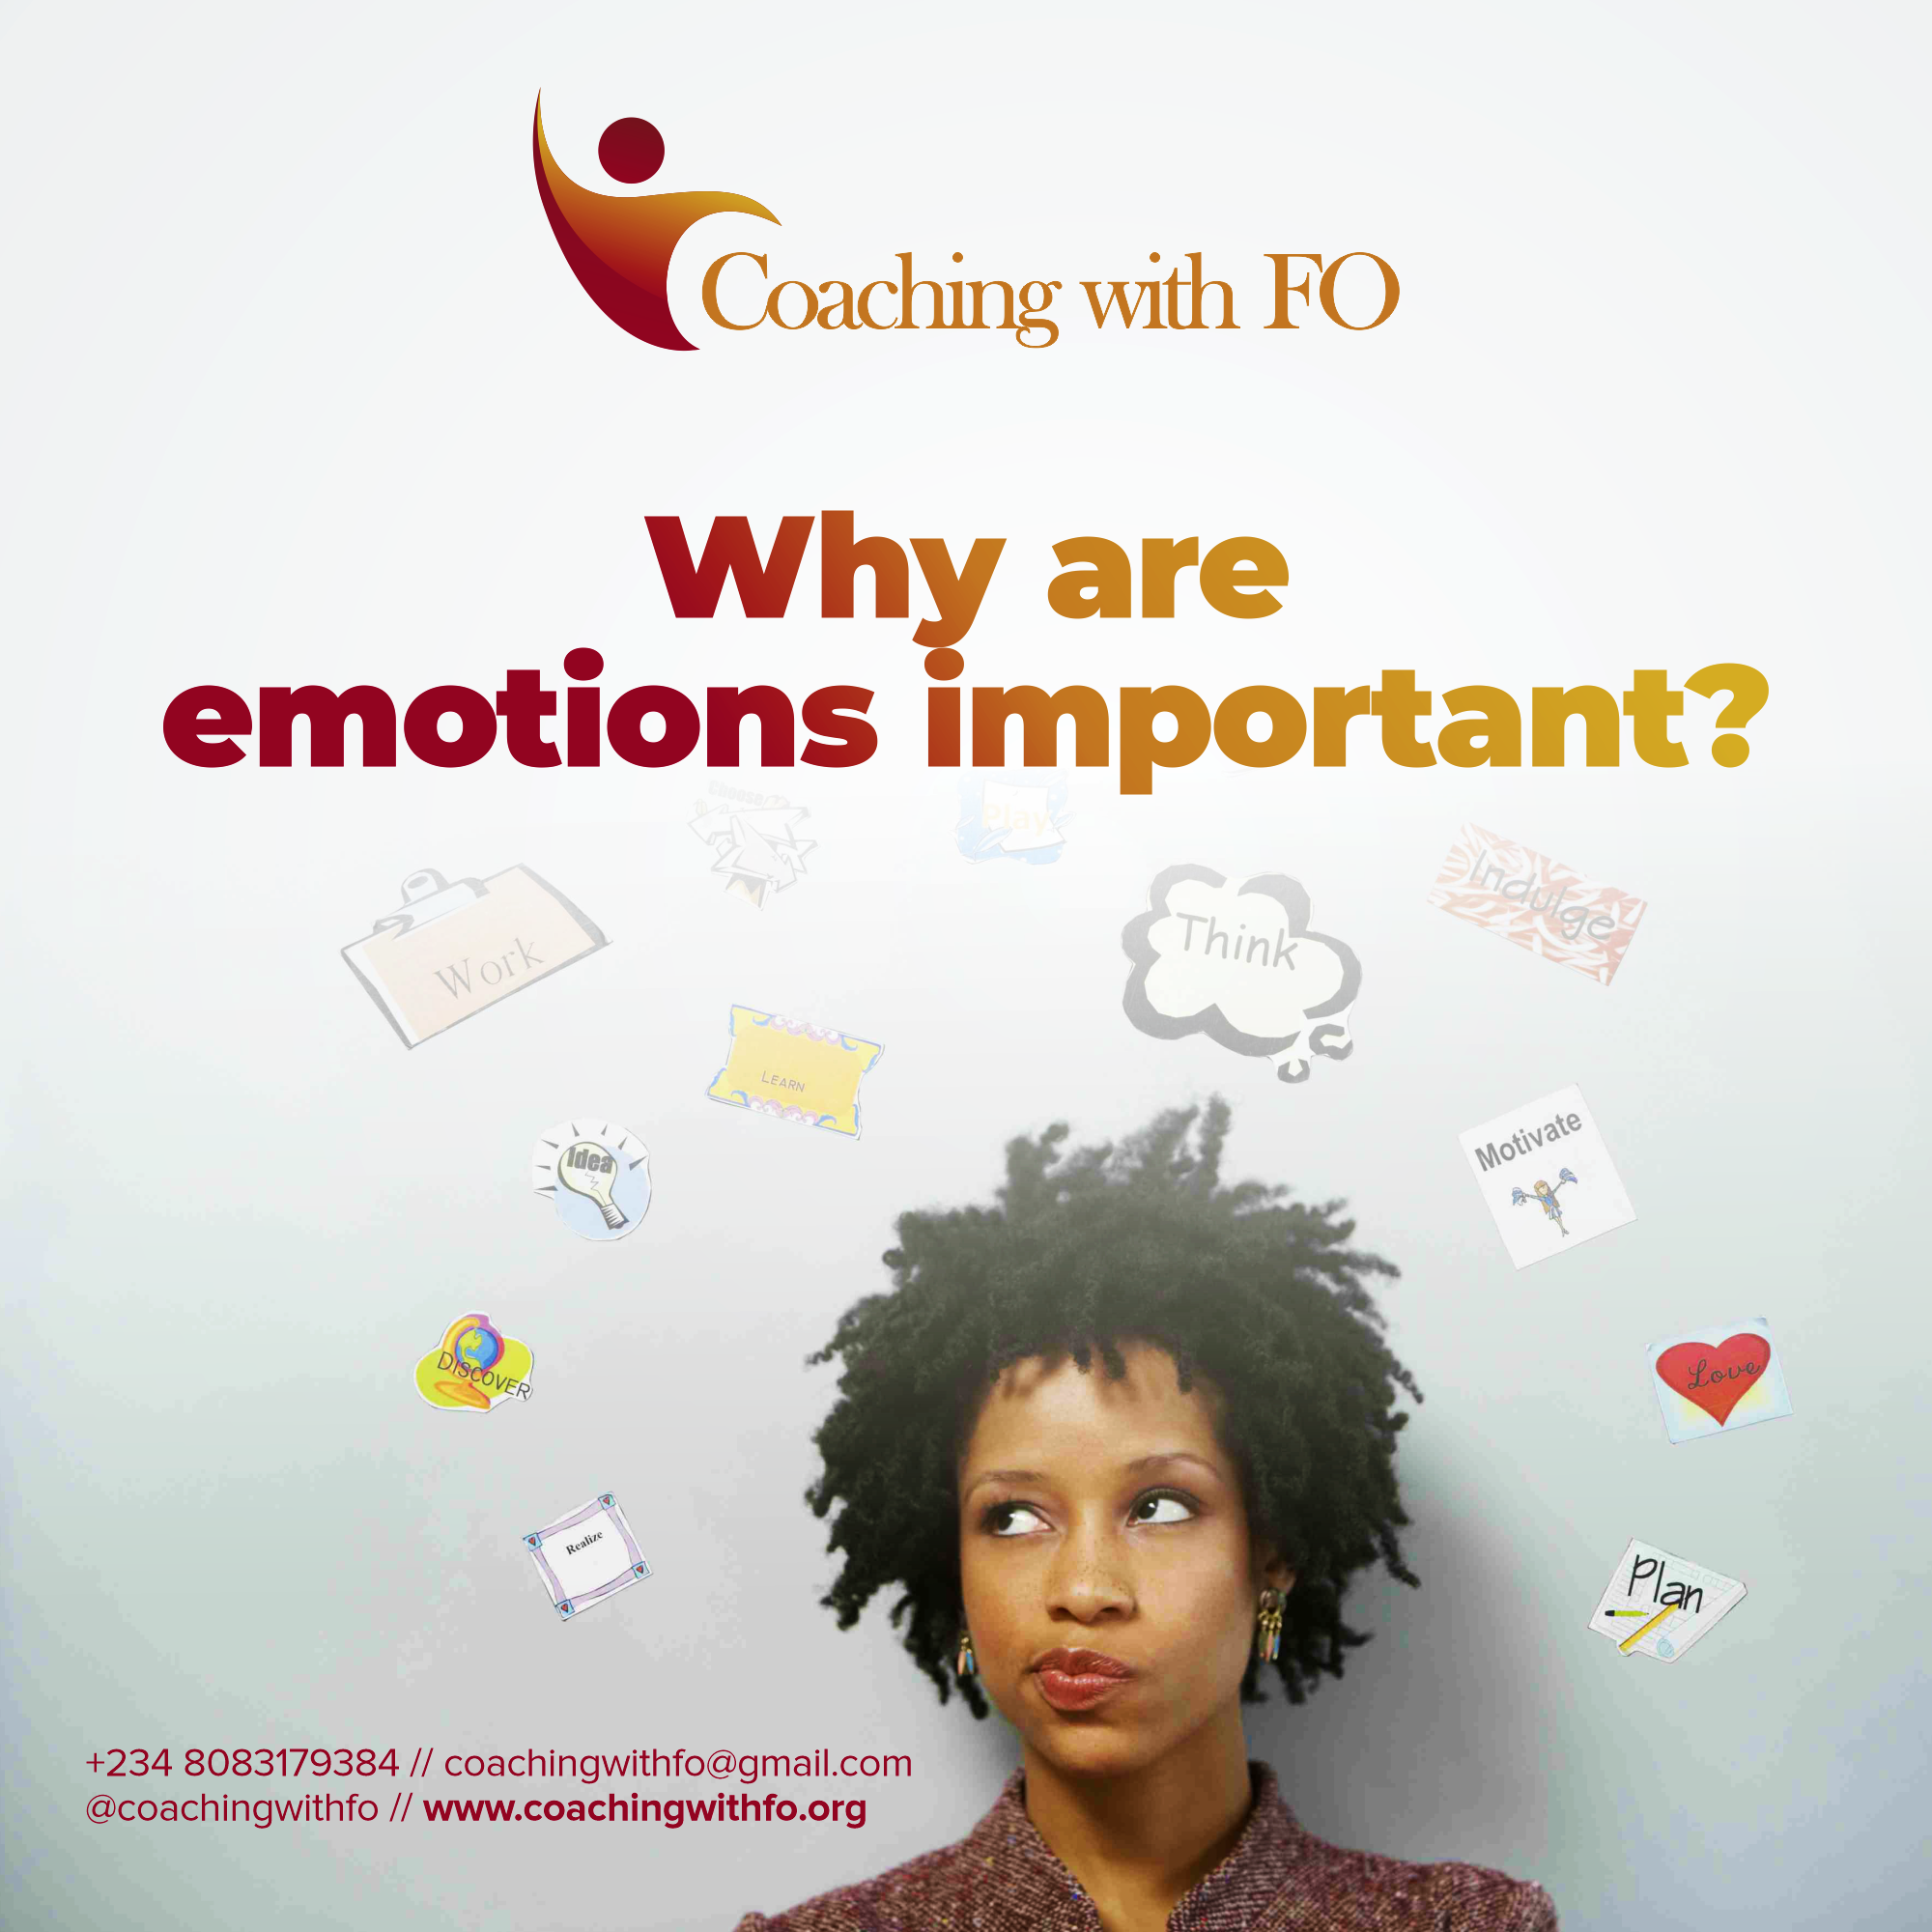 Why are emotions important